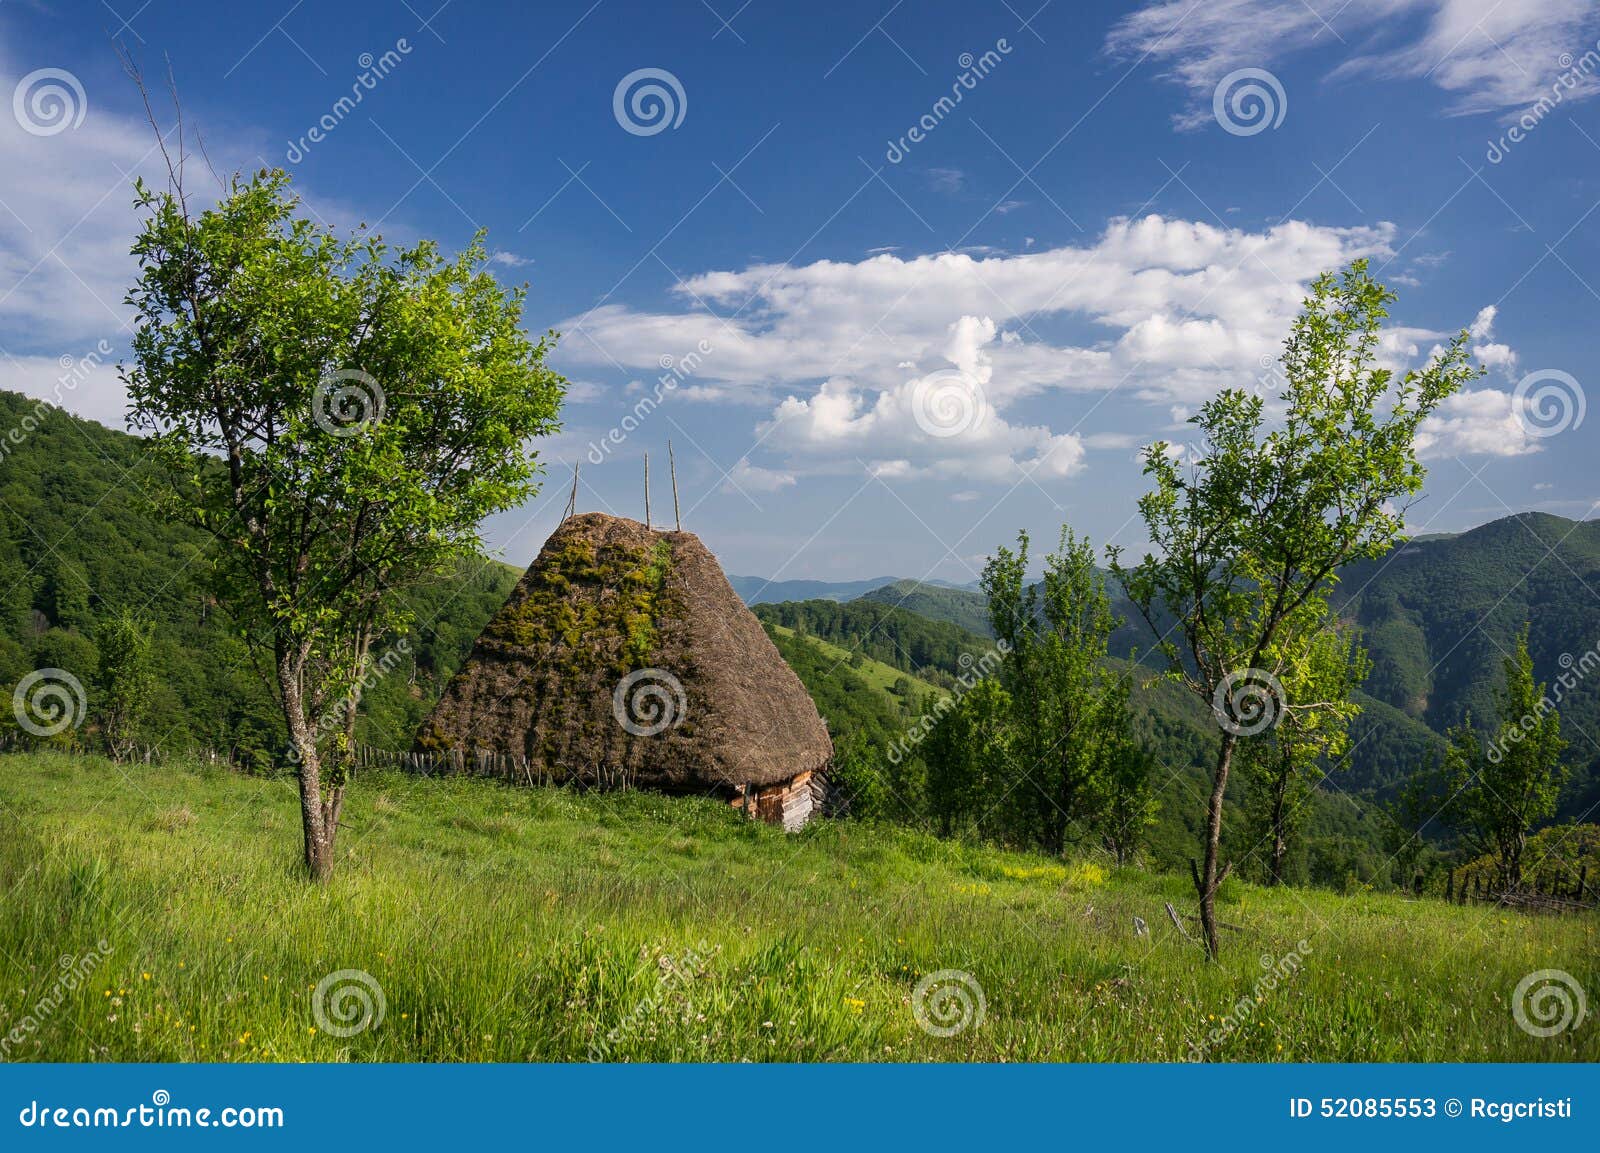 Small Thatched Cottage Royalty-Free Stock Photo | CartoonDealer.com ...